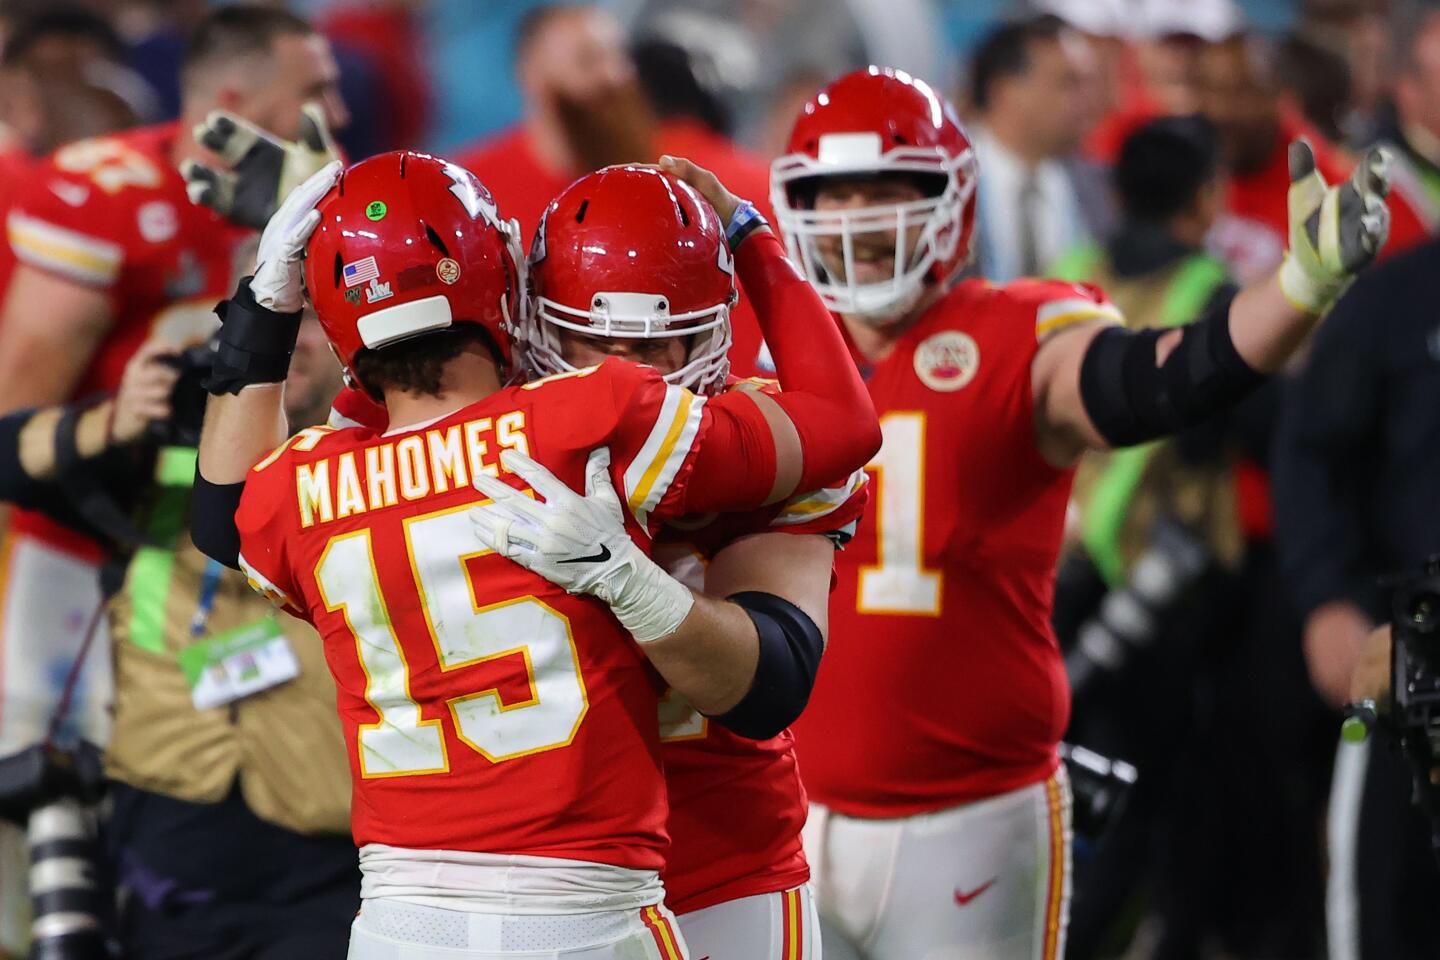 Kansas City Chiefs quarterback Patrick Mahomes celebrates with teammates after defeating San Francisco 49ers 31-20 in Super Bowl LIV on Feb. 2, 2020. Mahomes was named the Super Bowl's most valuable player.